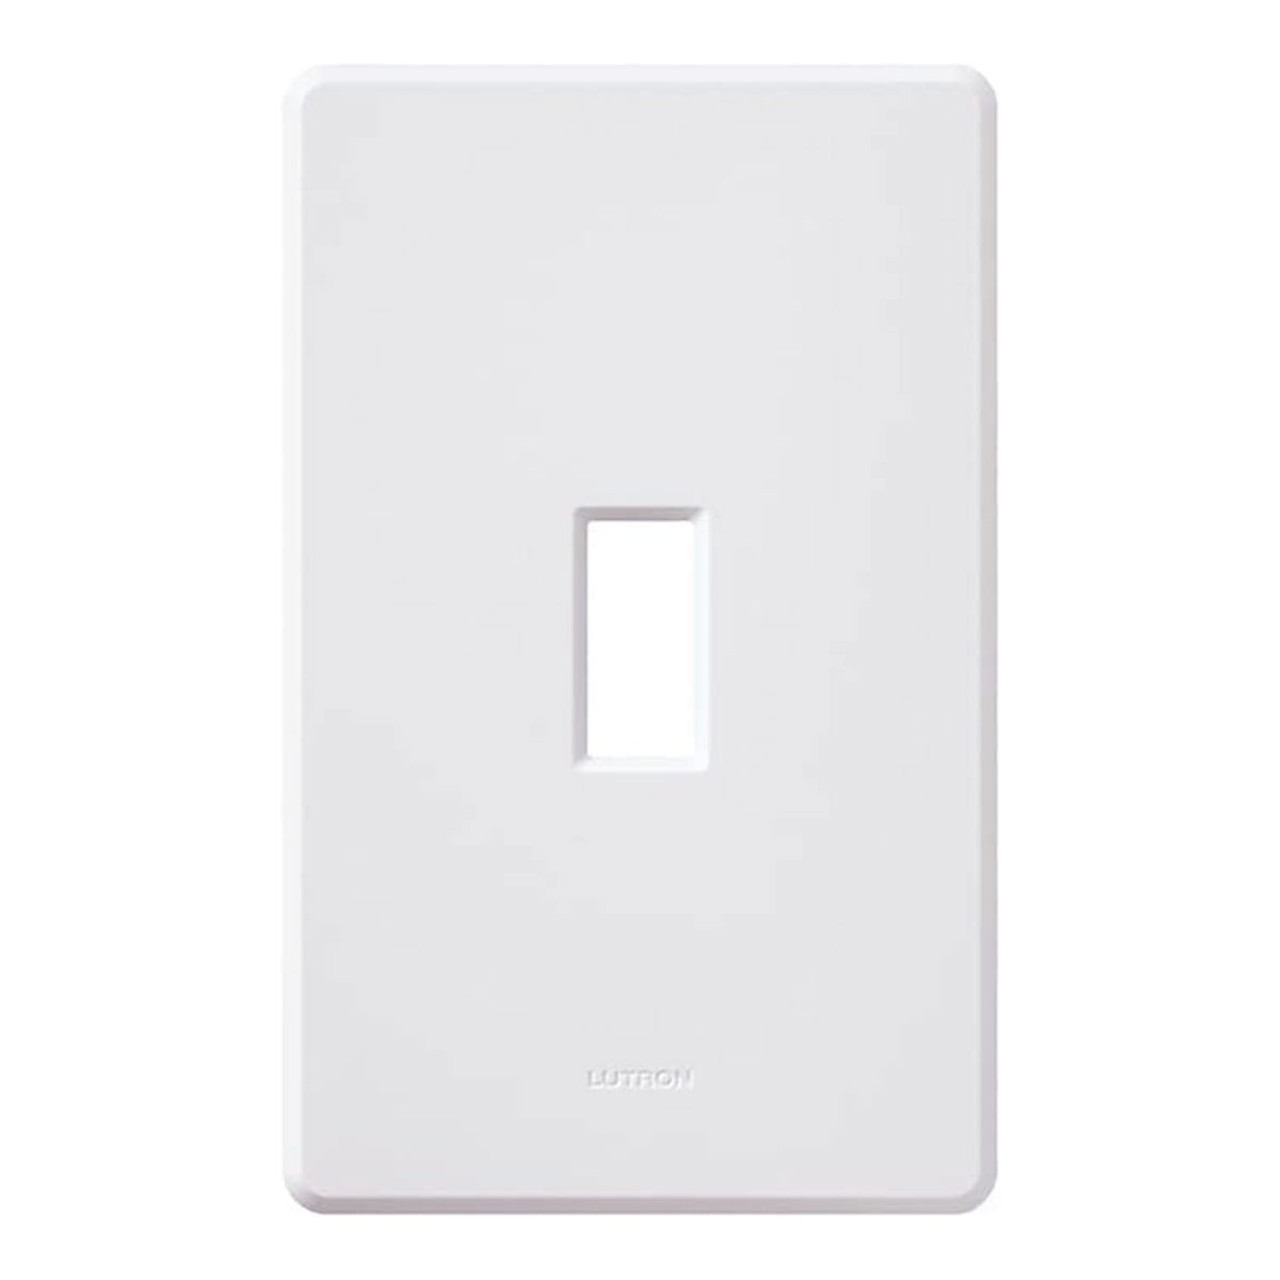 1 Toggle Screwless Wall Plate Lutron - White Plastic